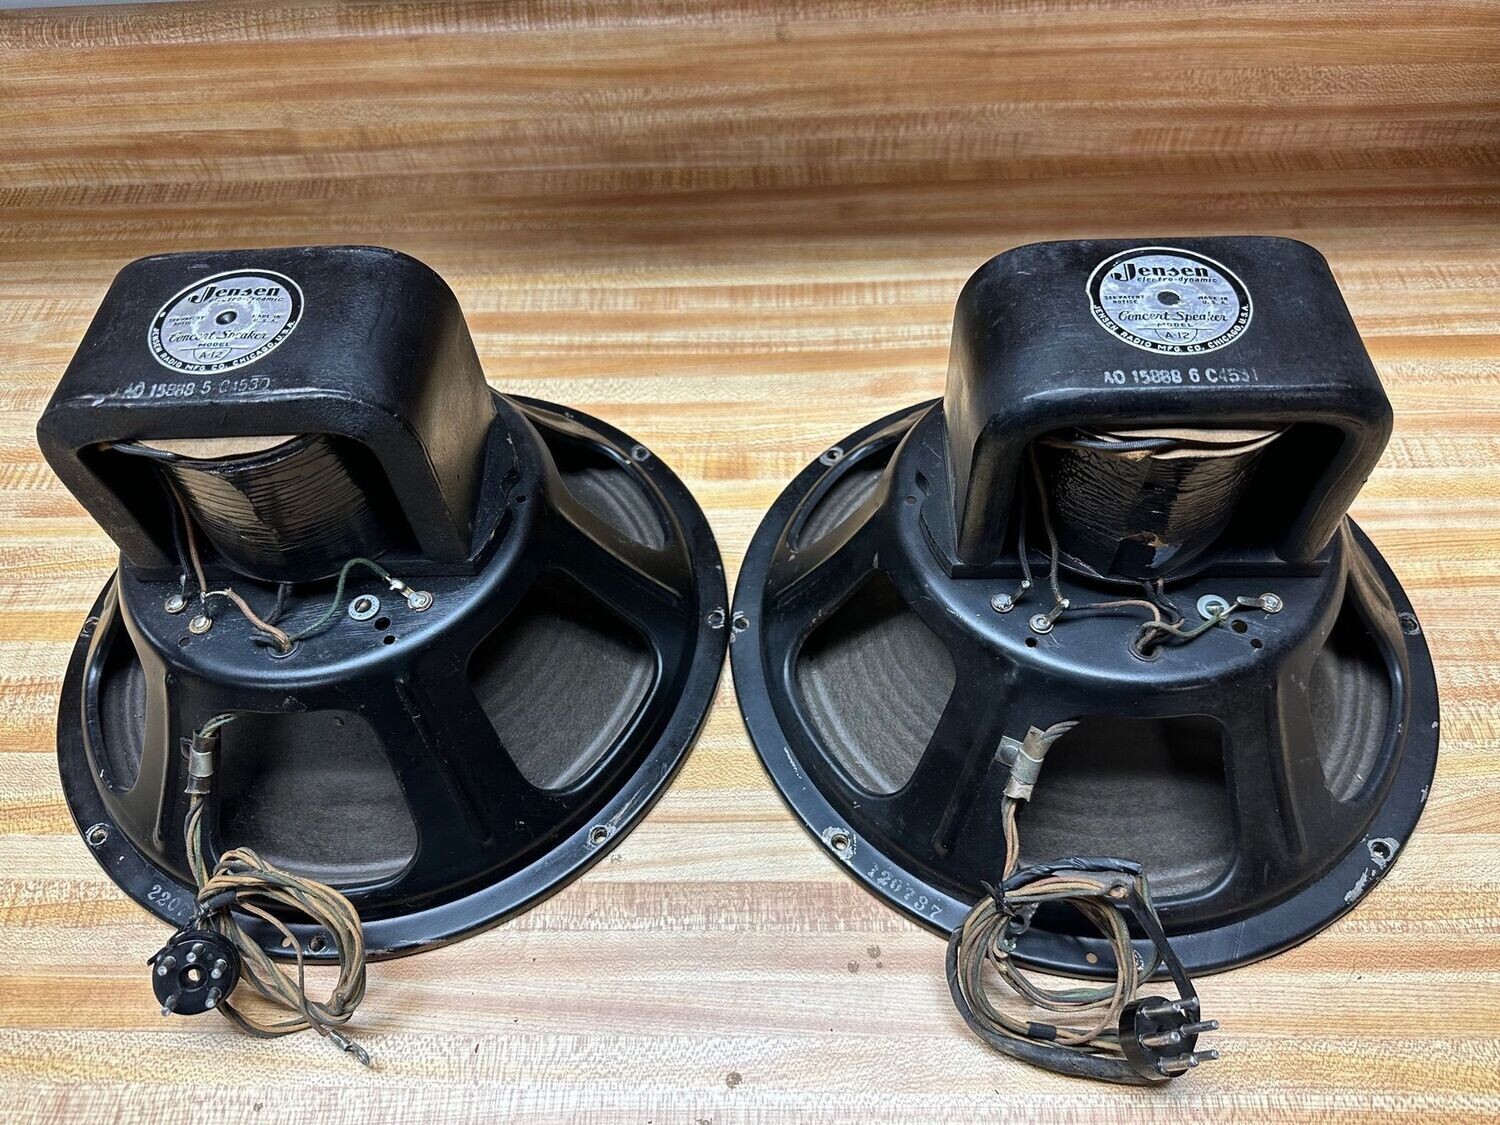 Jensen Field Coil Concert Speakers A-12 (Pair) with Power Amp